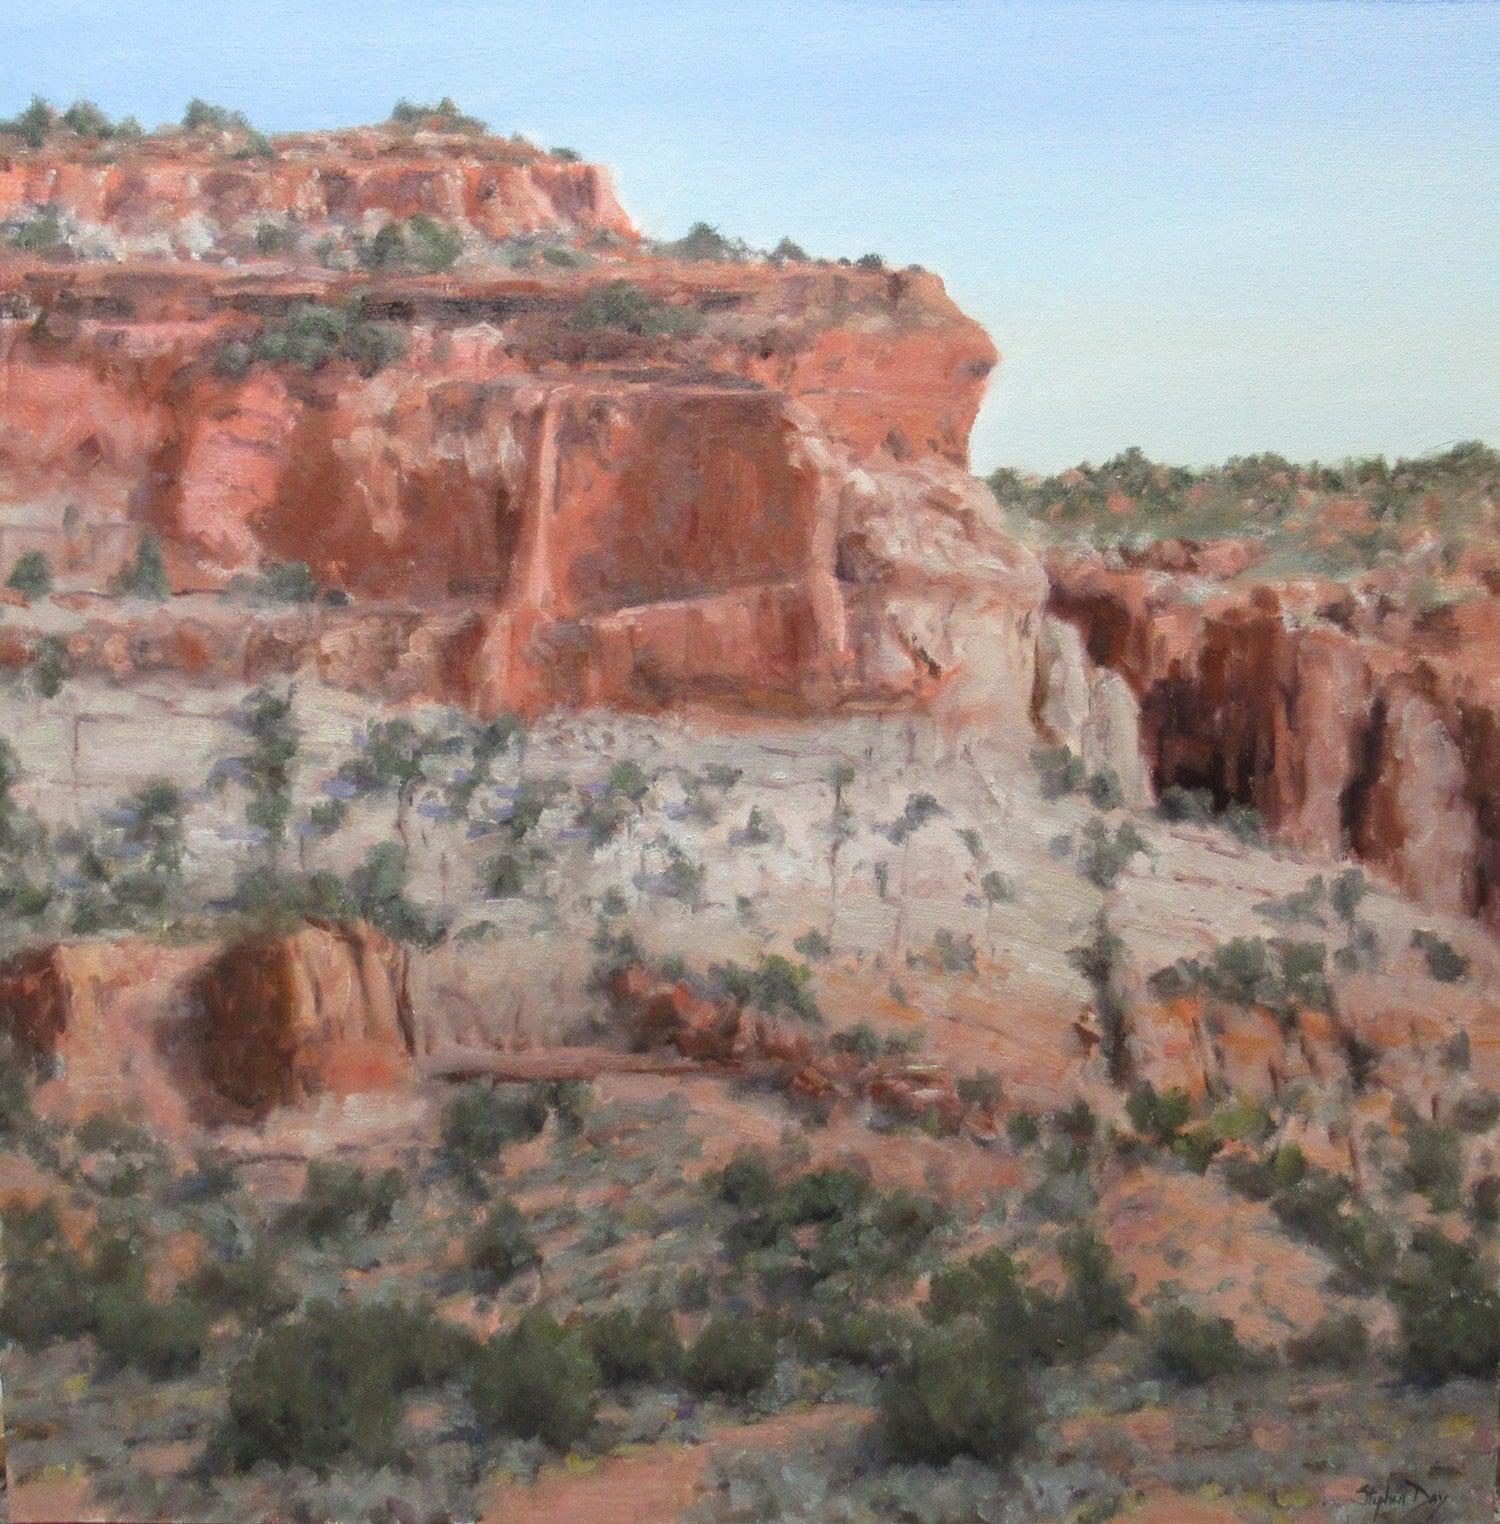 Silence with a View-painting-Stephen Day-Sorrel Sky Gallery